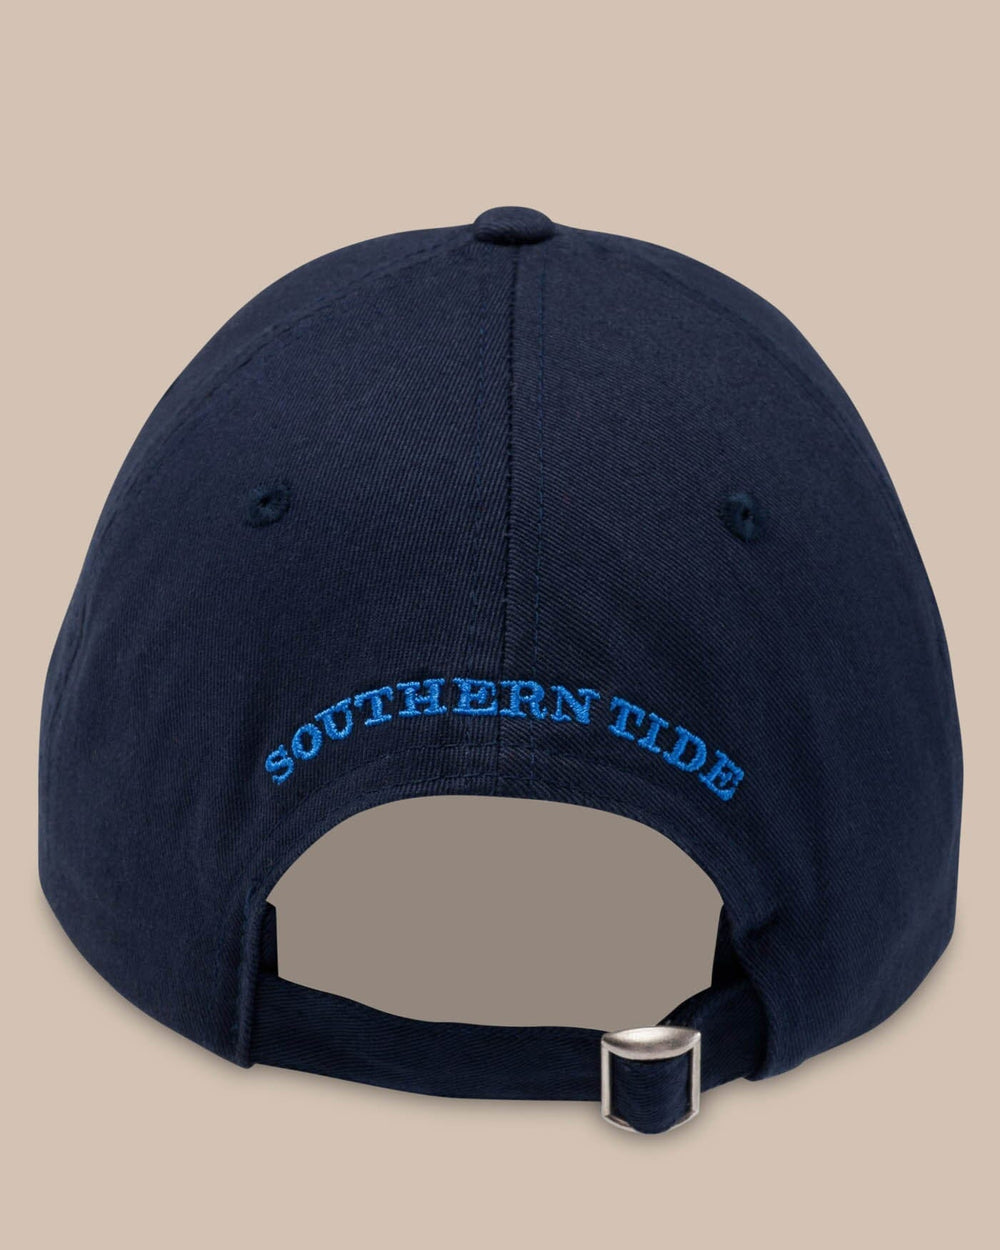 The back of the Skipjack Hat by Southern Tide - Navy